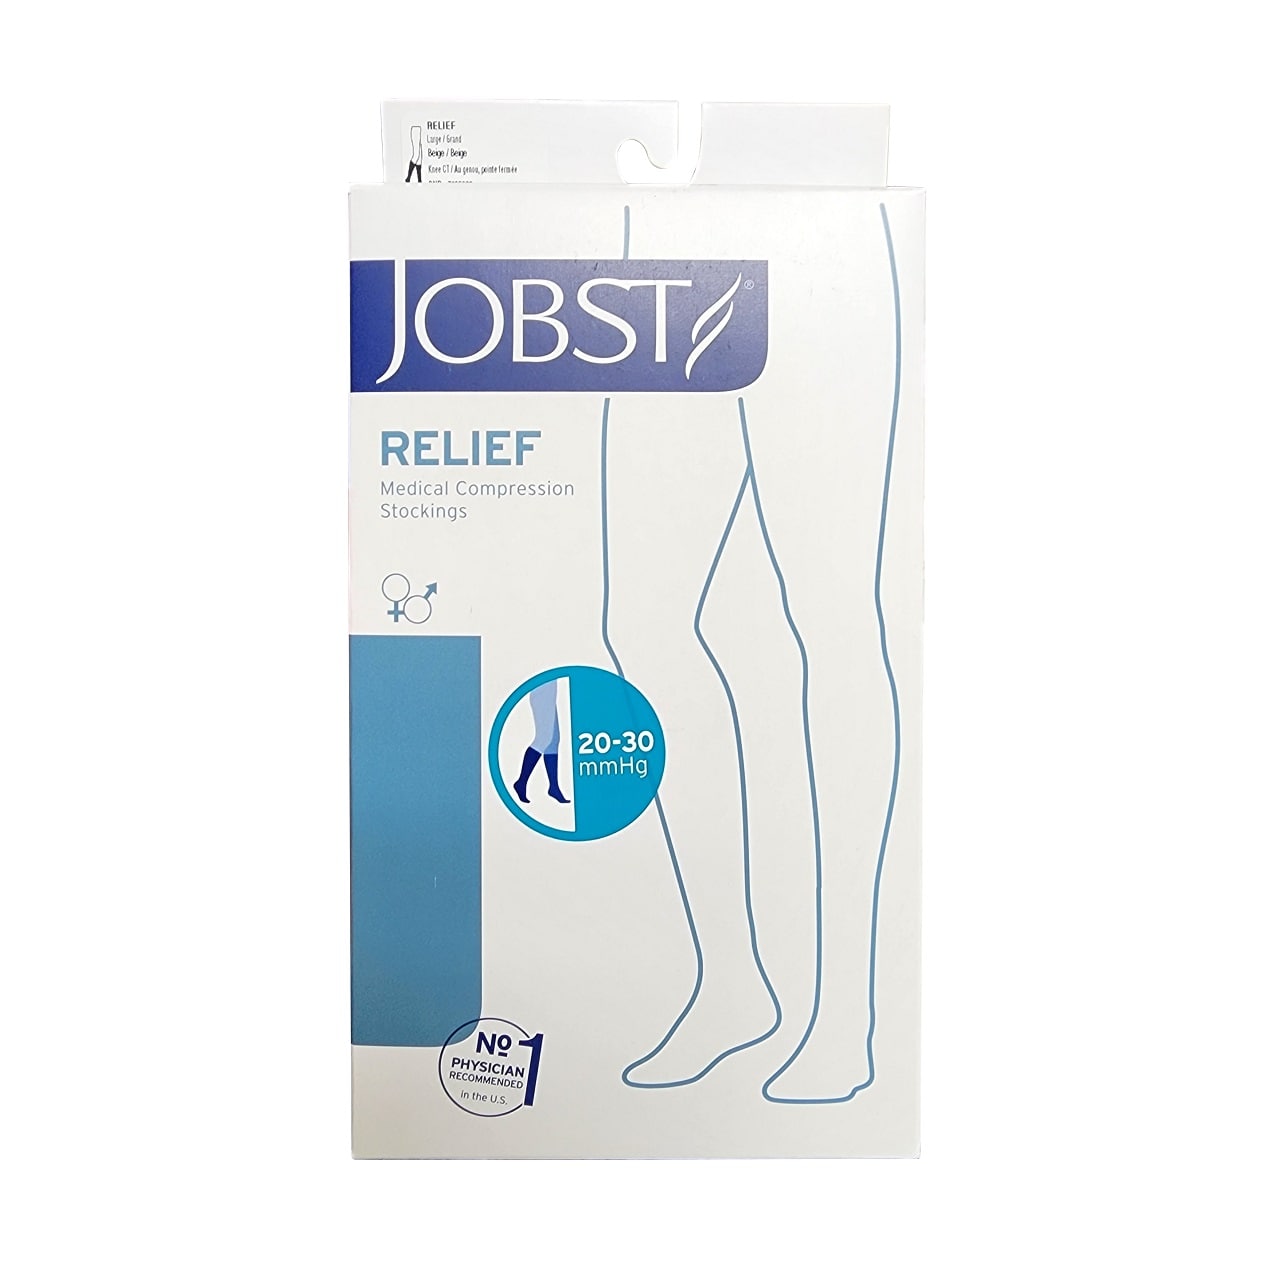 Jobst Relief Compression Stockings 20-30 mmHg - Knee High / Closed